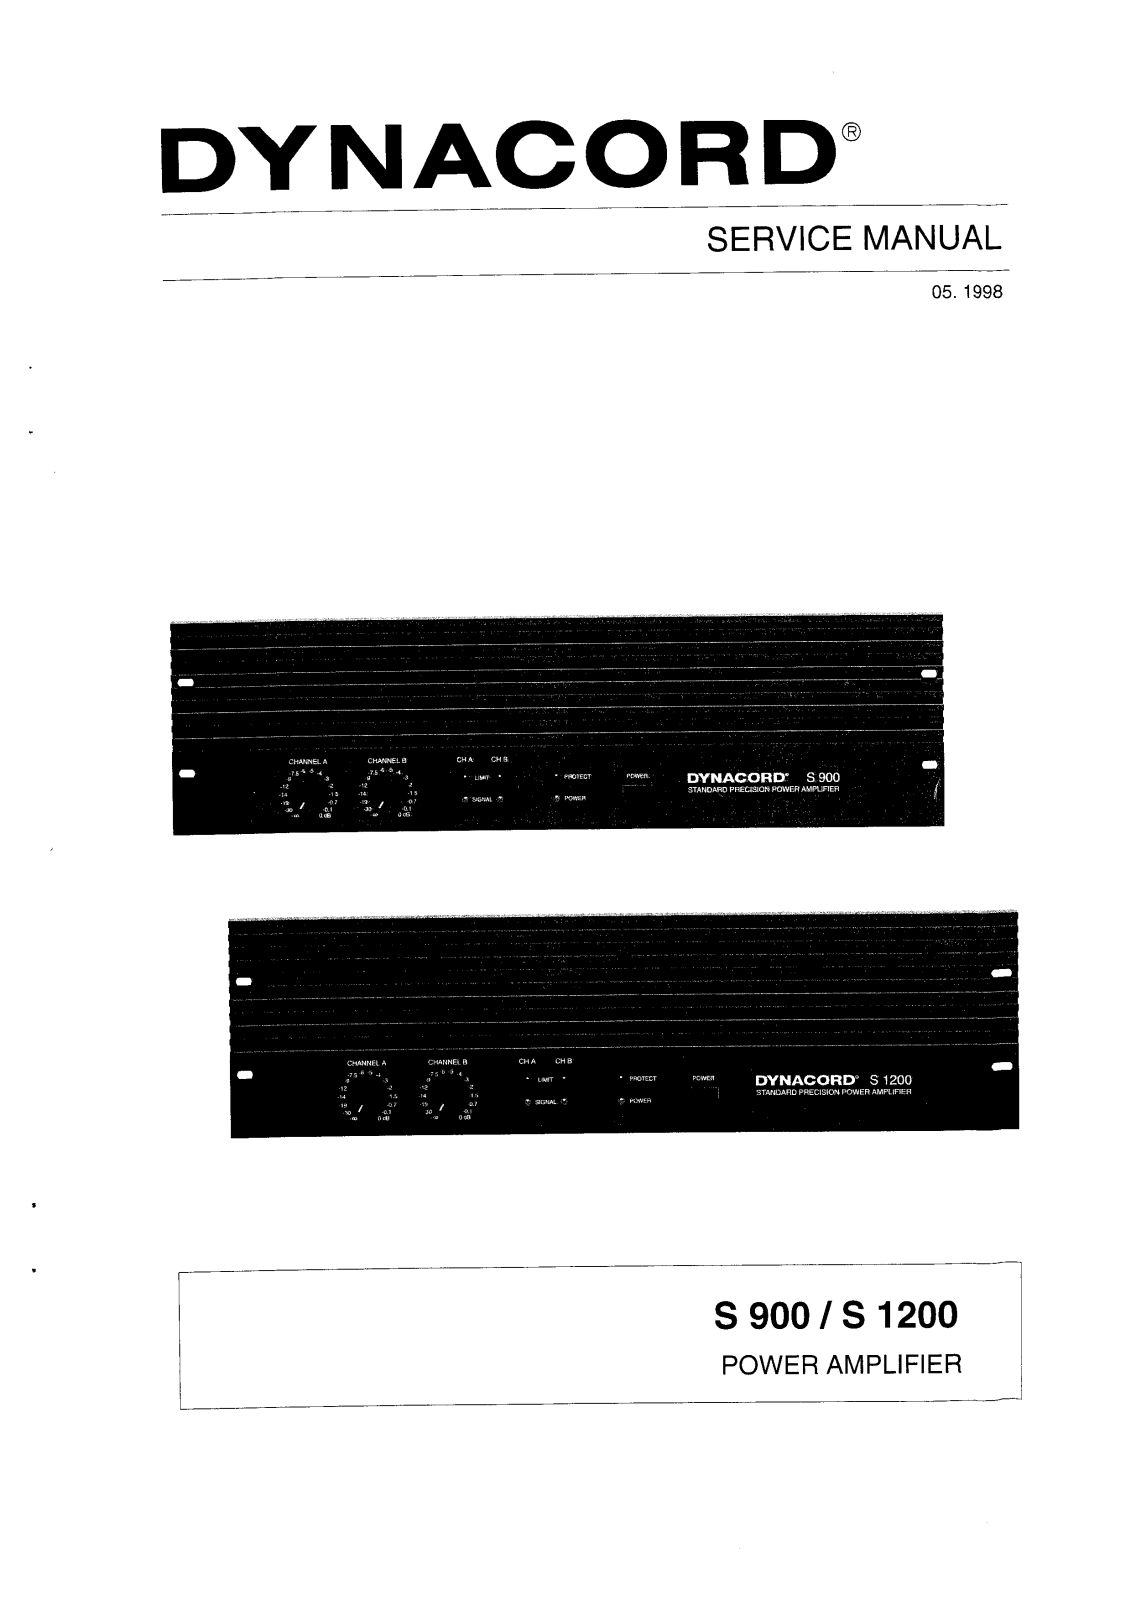 Dynacord S-1200 Service manual